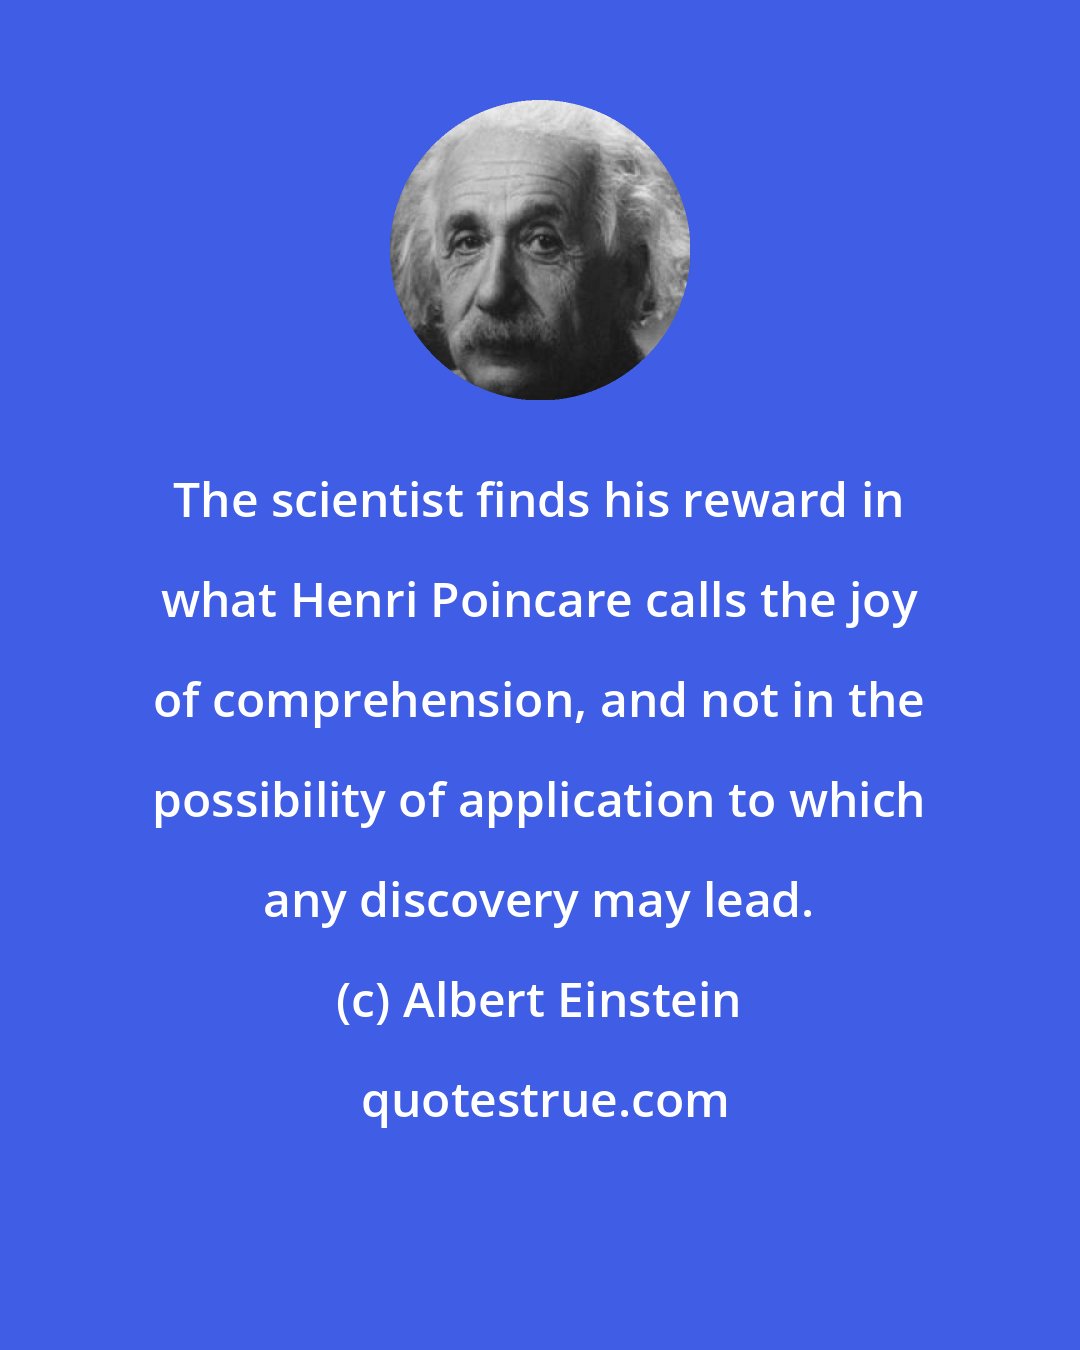 Albert Einstein: The scientist finds his reward in what Henri Poincare calls the joy of comprehension, and not in the possibility of application to which any discovery may lead.